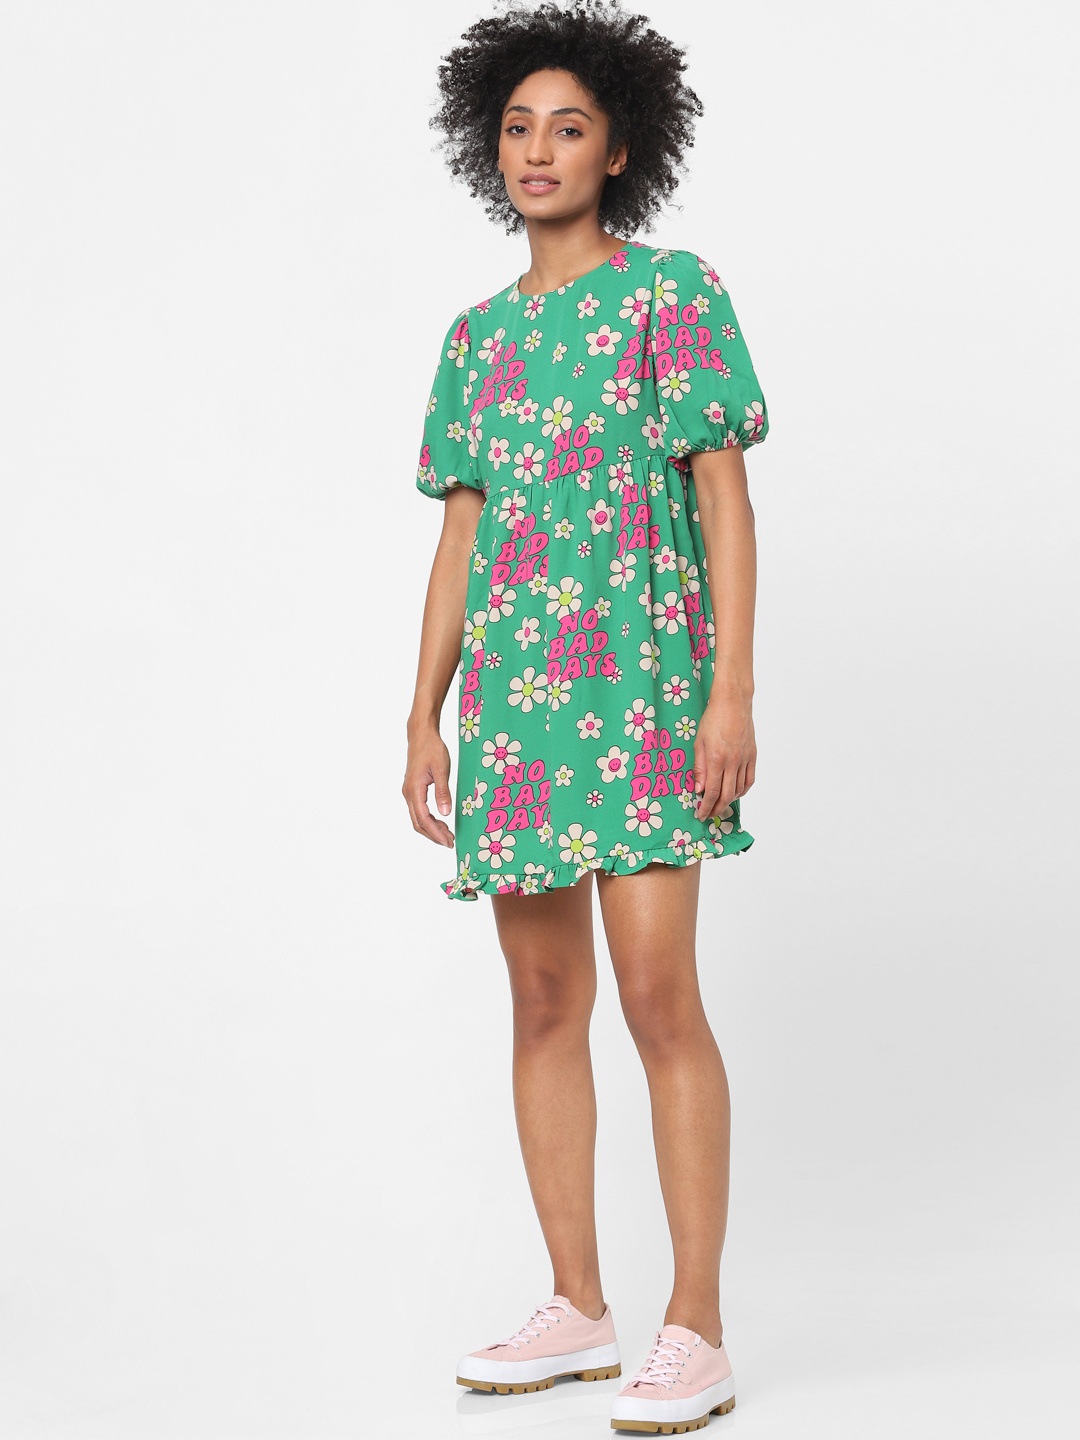 

ONLY Women Green & Pink Floral Printed Dress